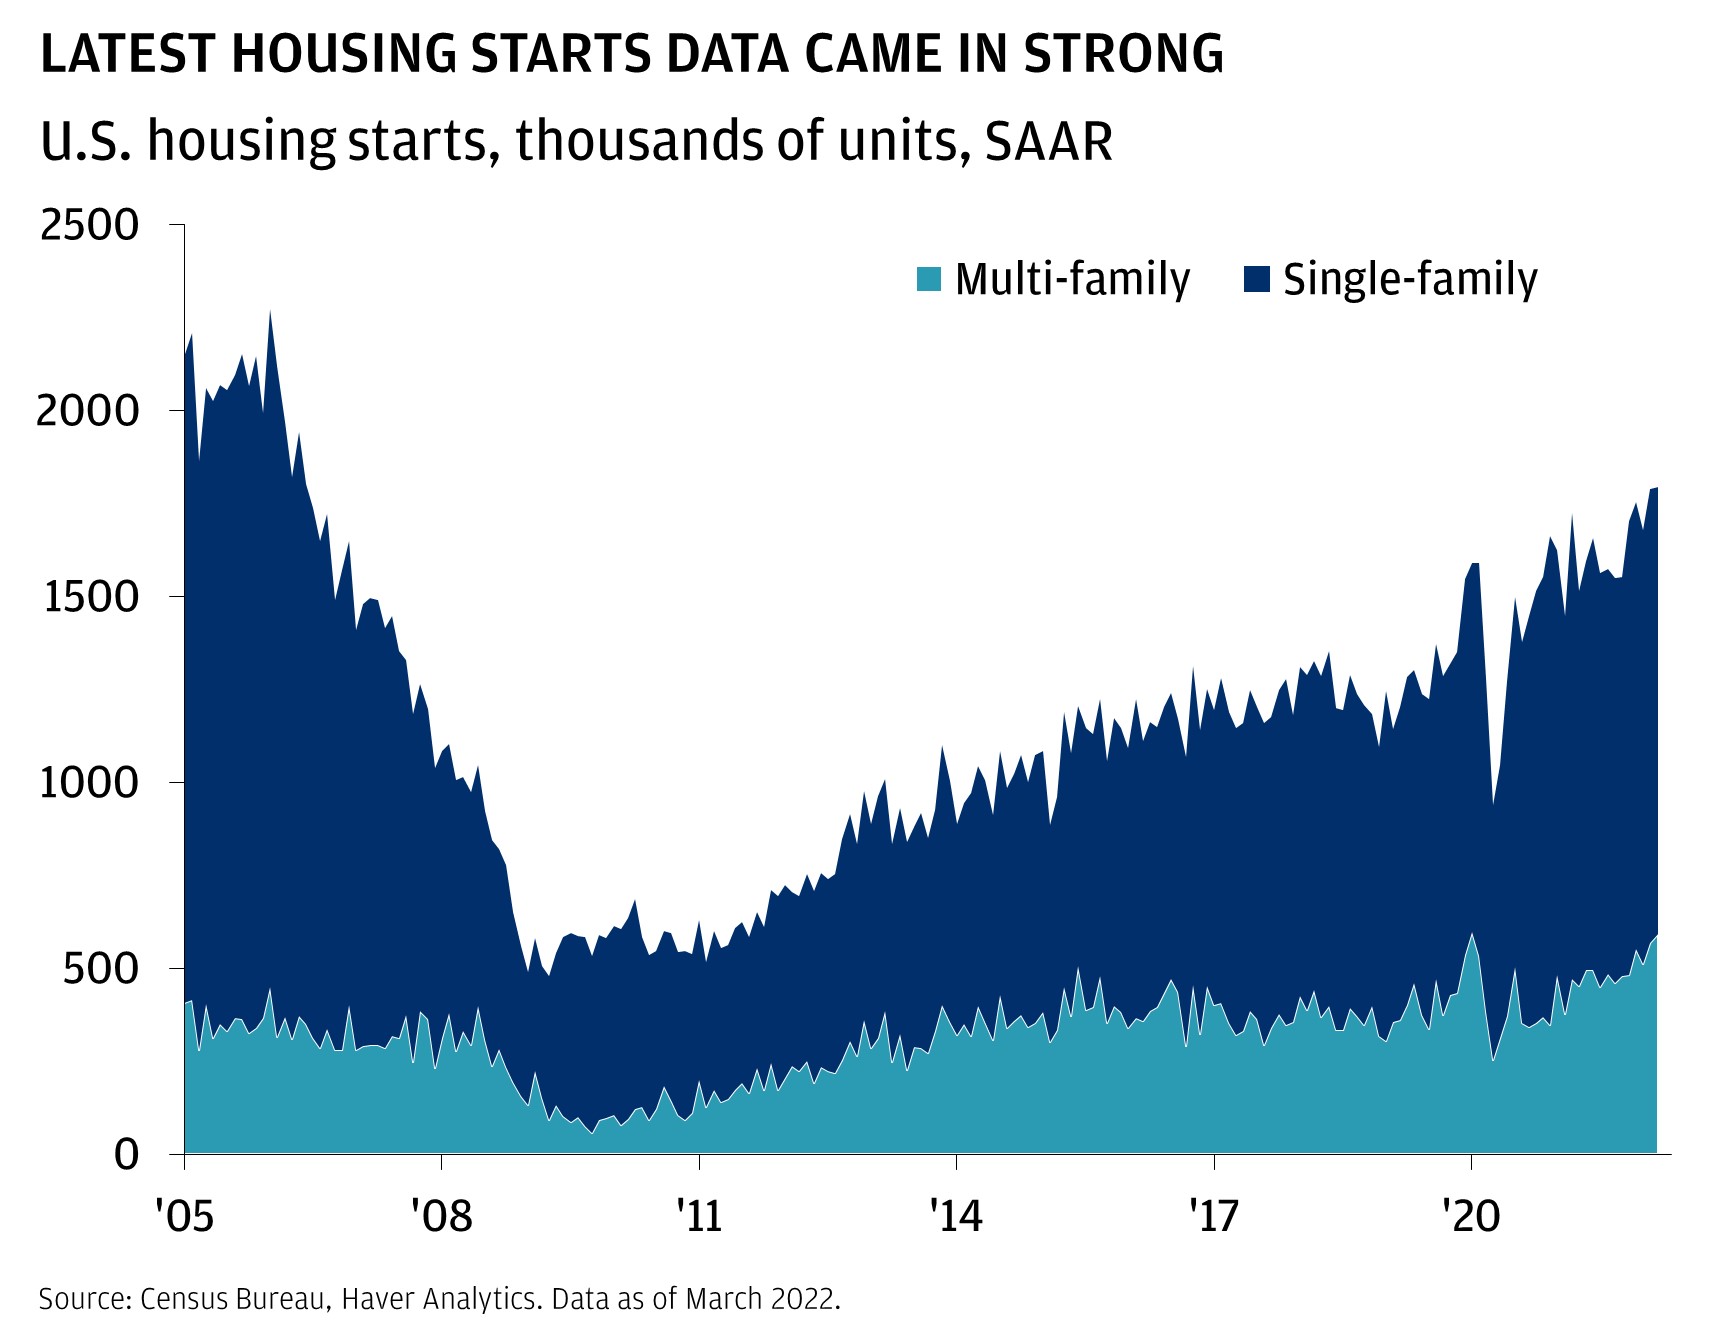 This chart shows the U.S. housing starts (thousands of units) for multi-family and single-family homes, from January 2005 until March 2022.